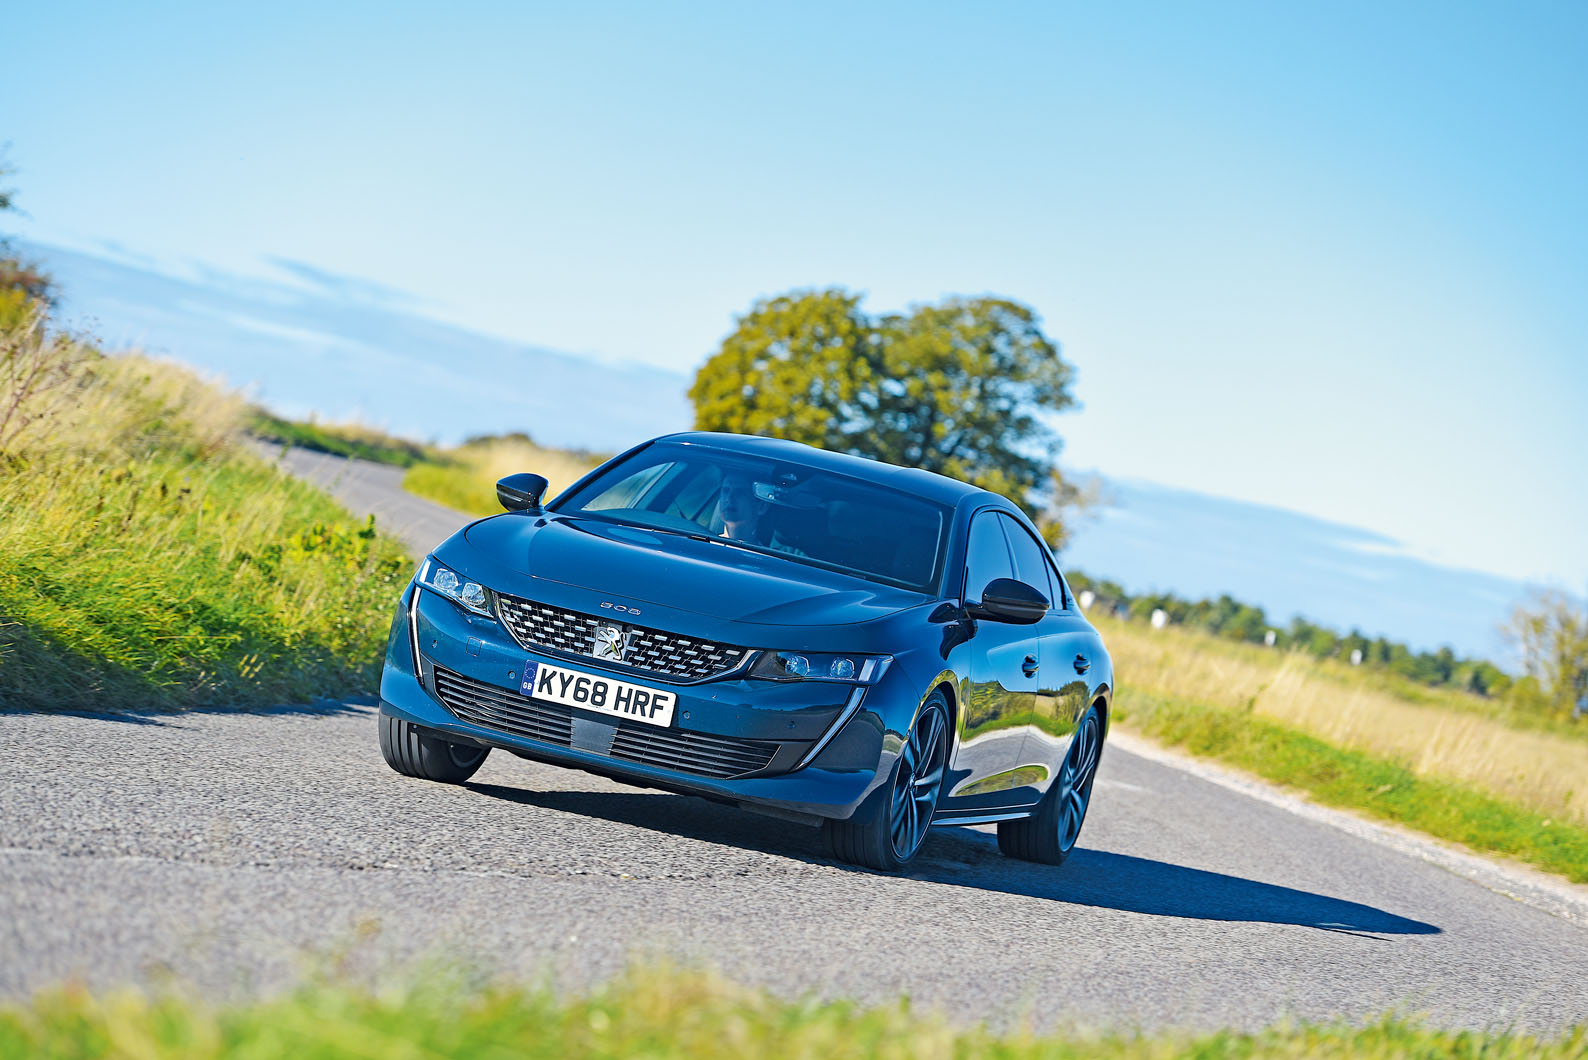 Peugeot 508 2018 road test review - cornering front